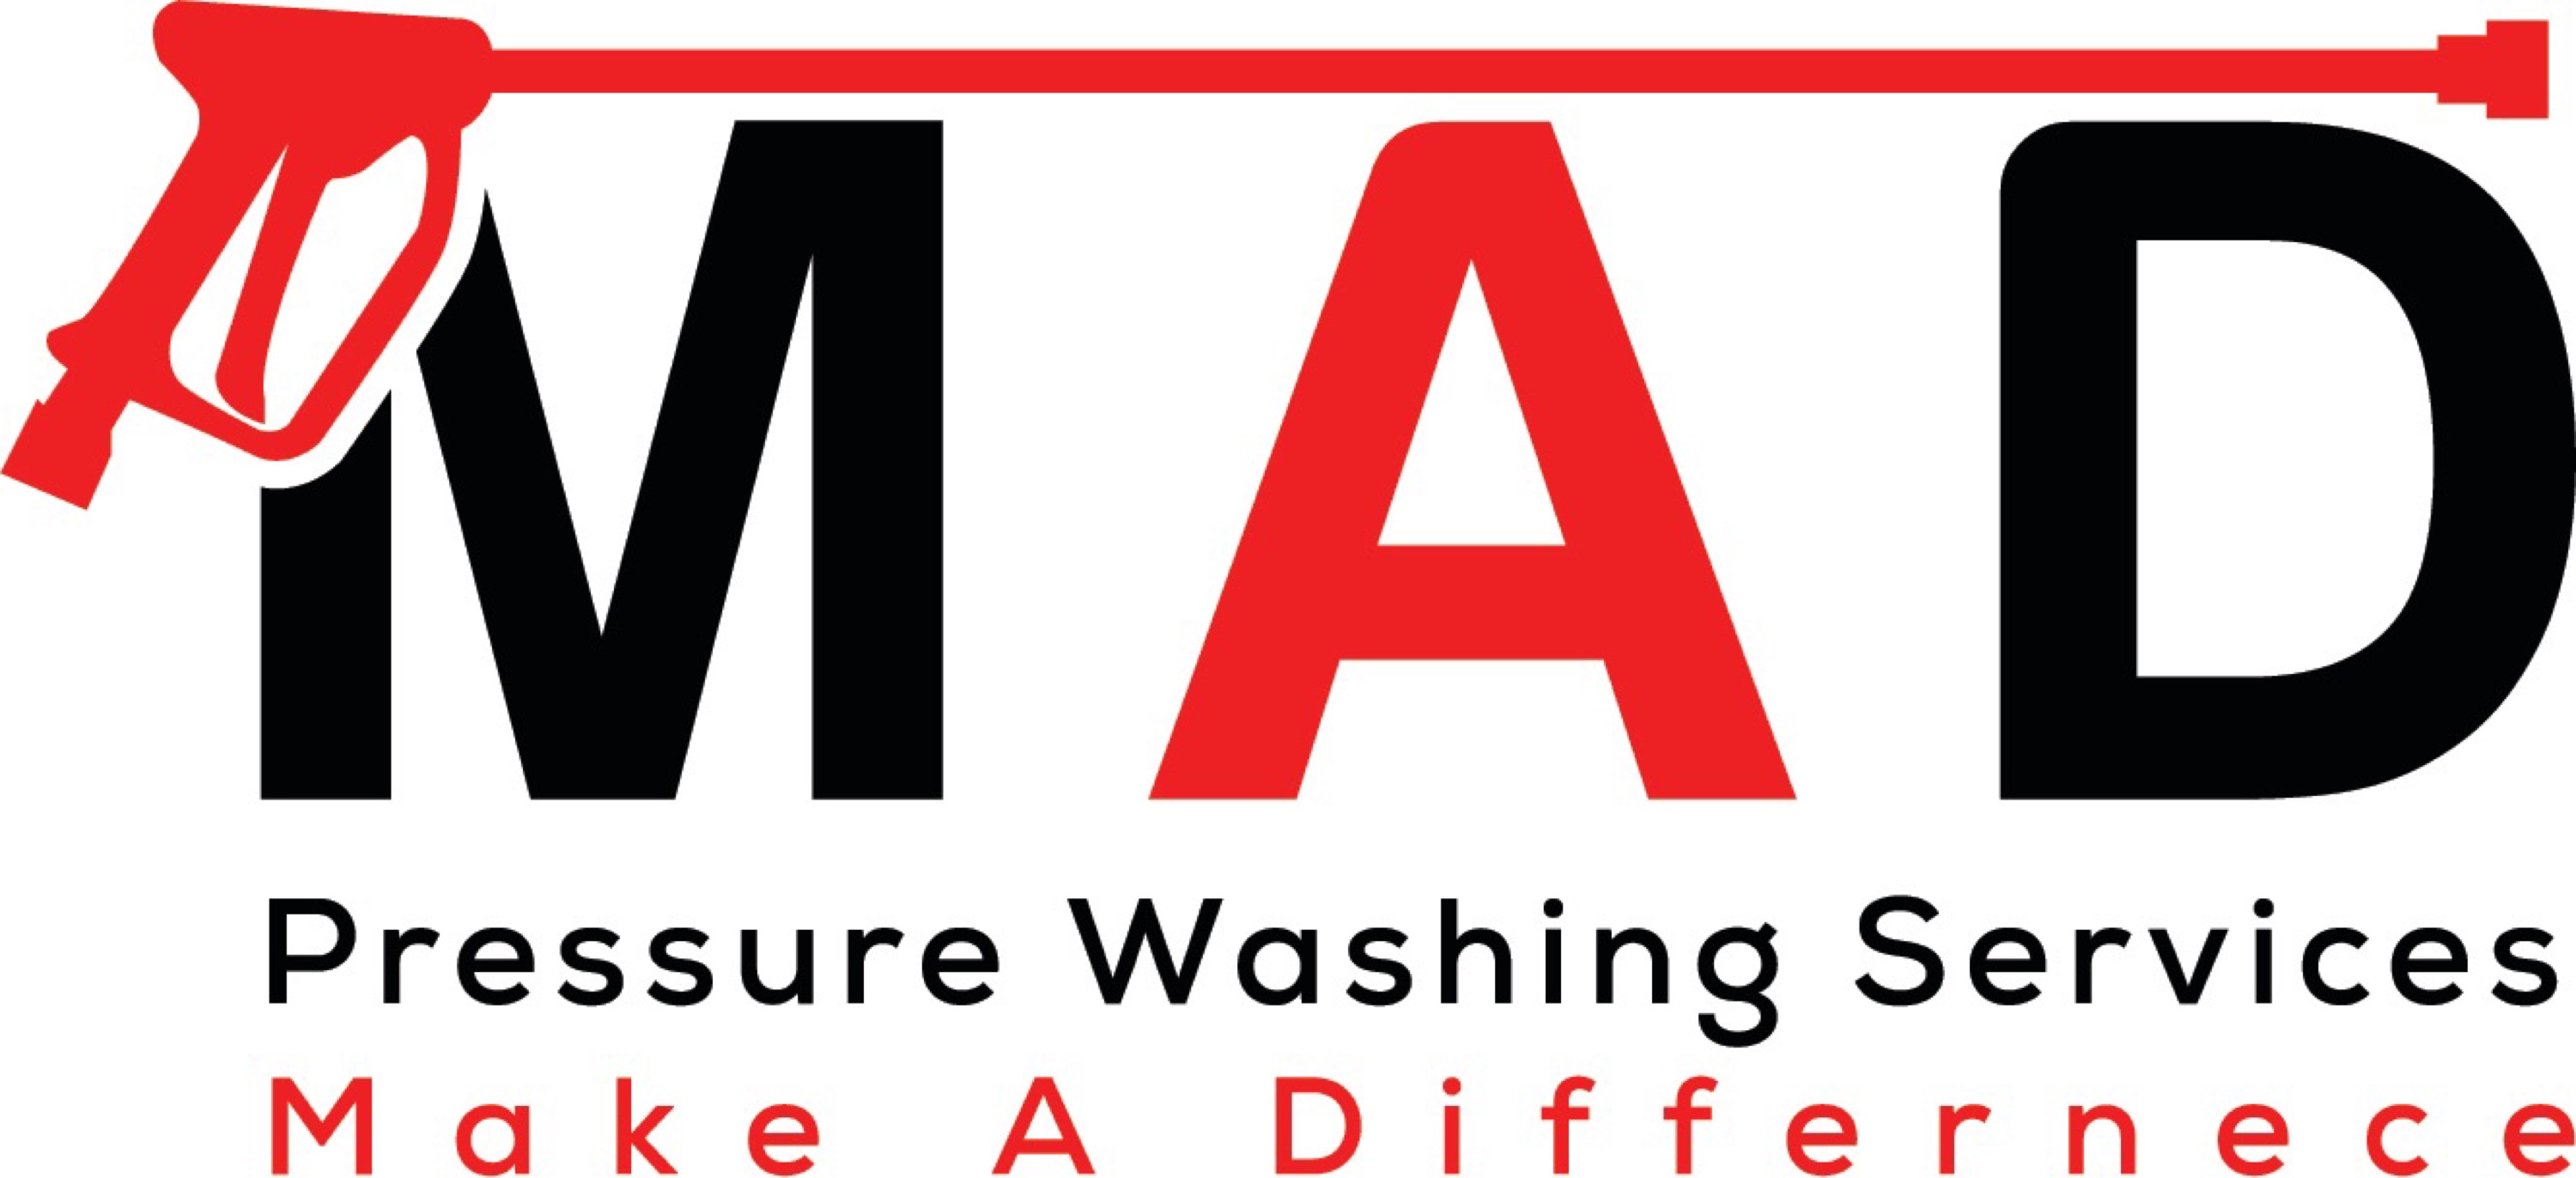 Make A Difference Pressure Washing Services Logo